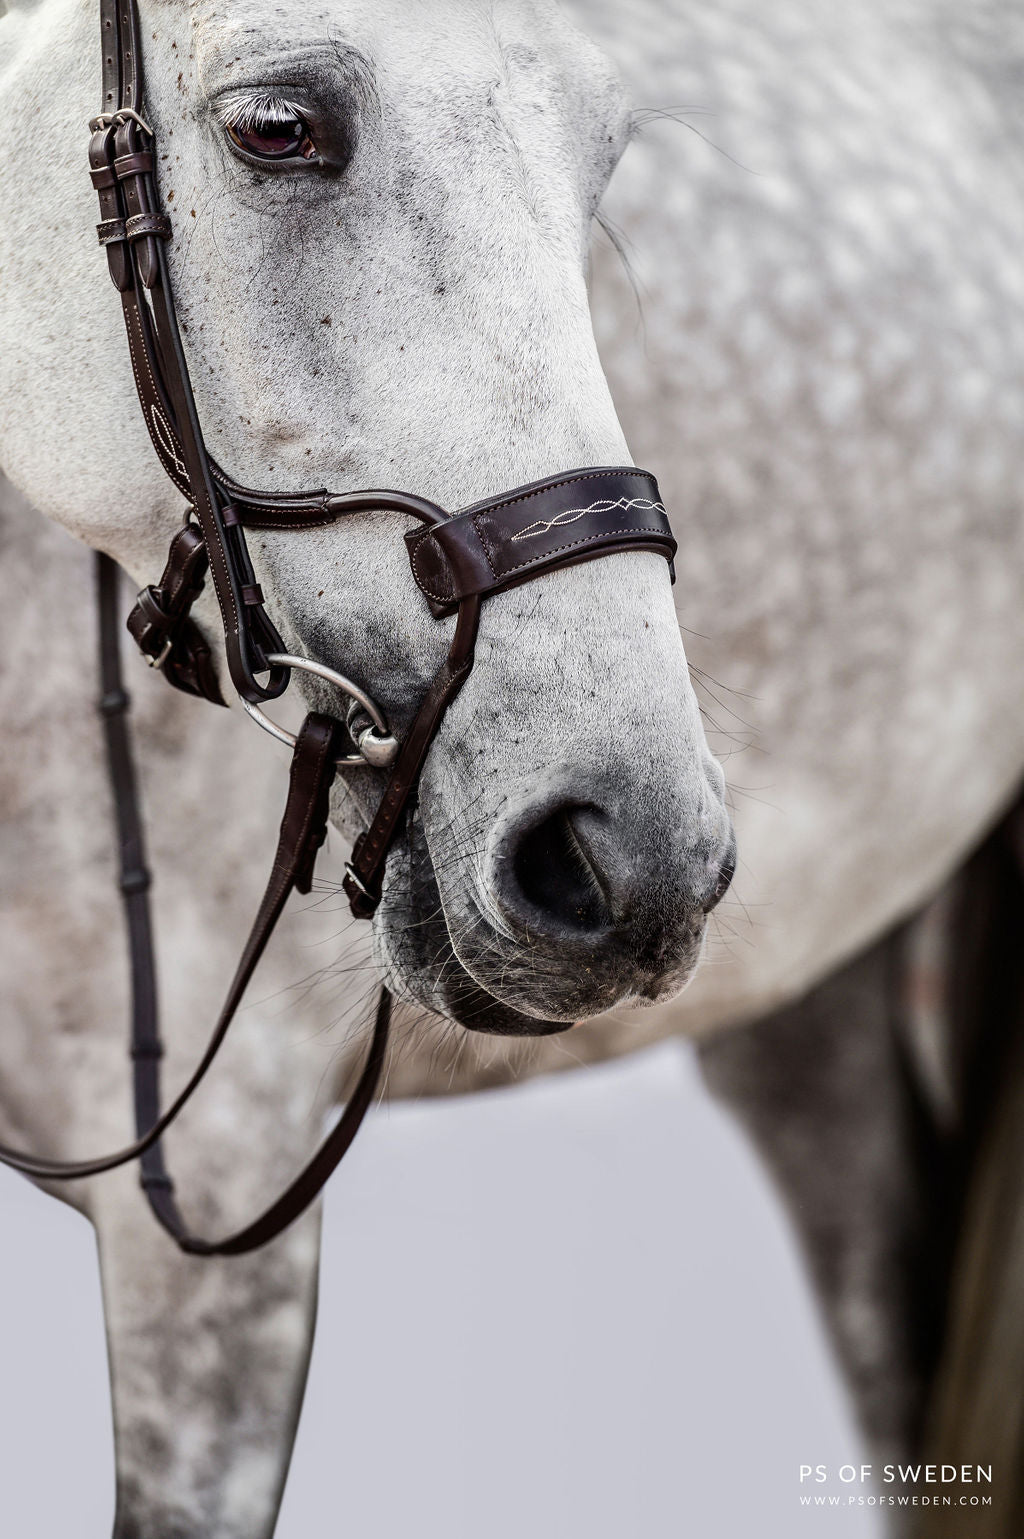 The noseband also features a whole new design. It does not put any pressure on the teeth from the outside which reduces possible bit-related issues. 